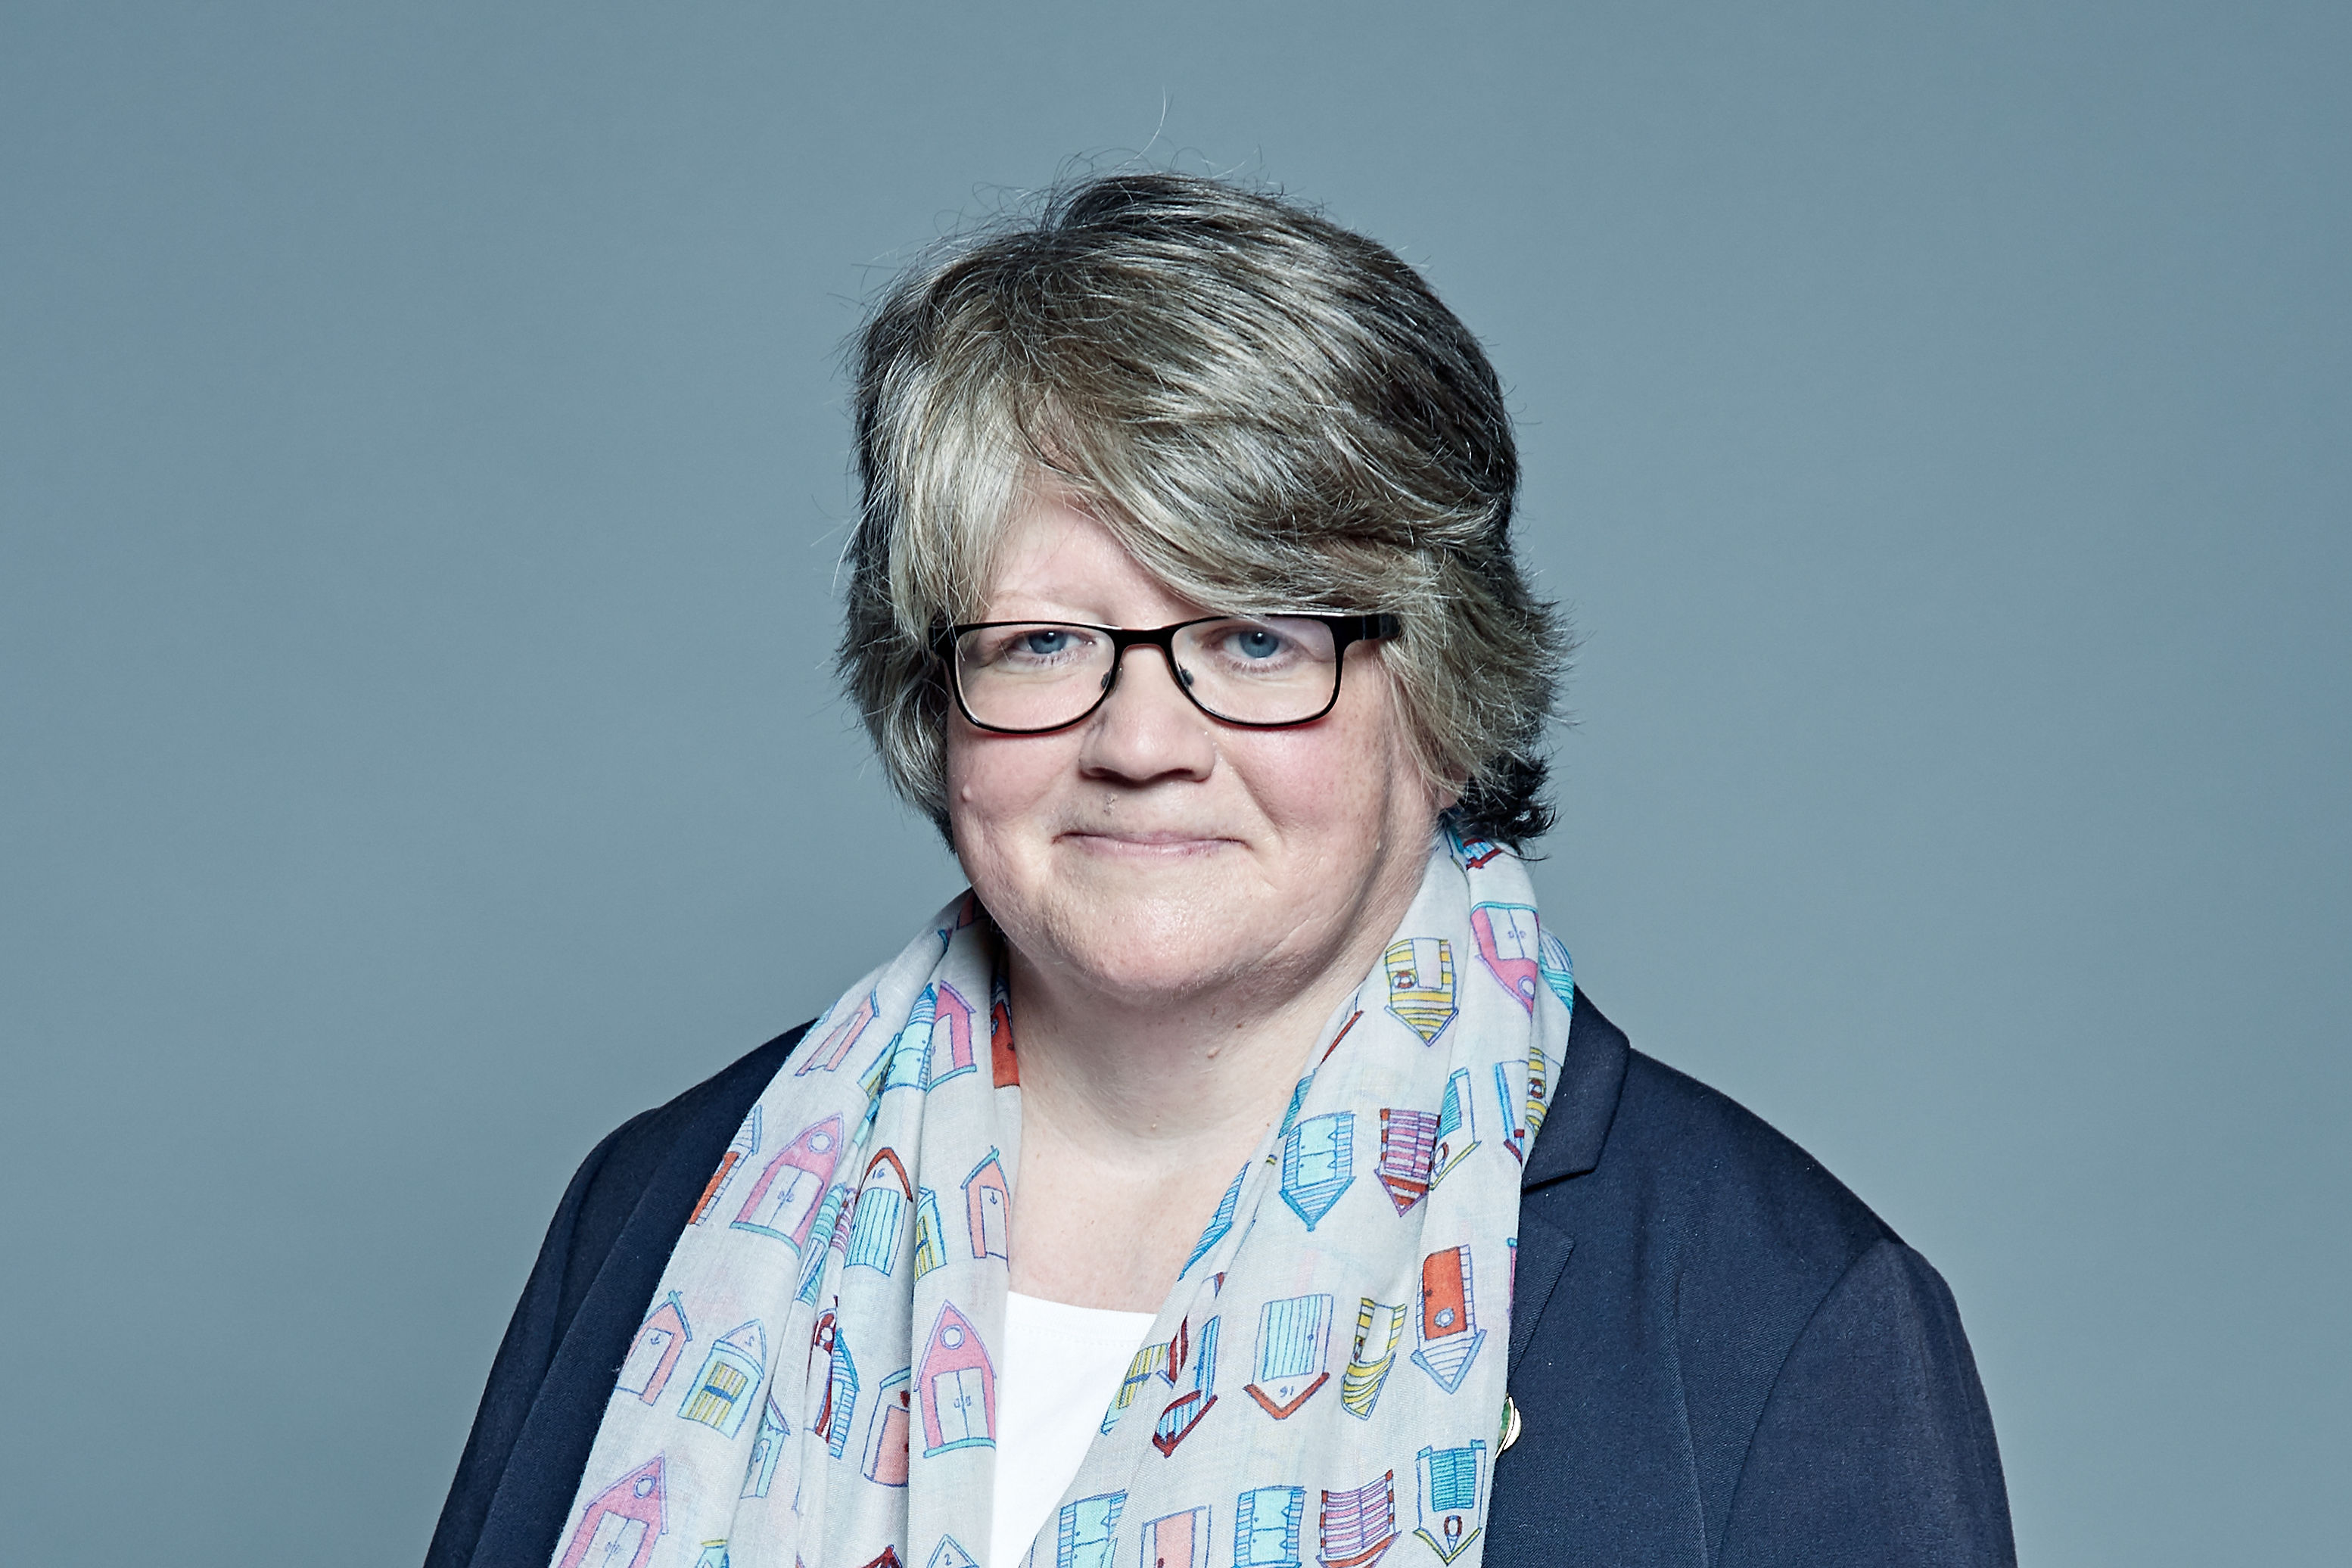 Therese Coffey has been promoted to the Cabinet, replacing Amber Rudd